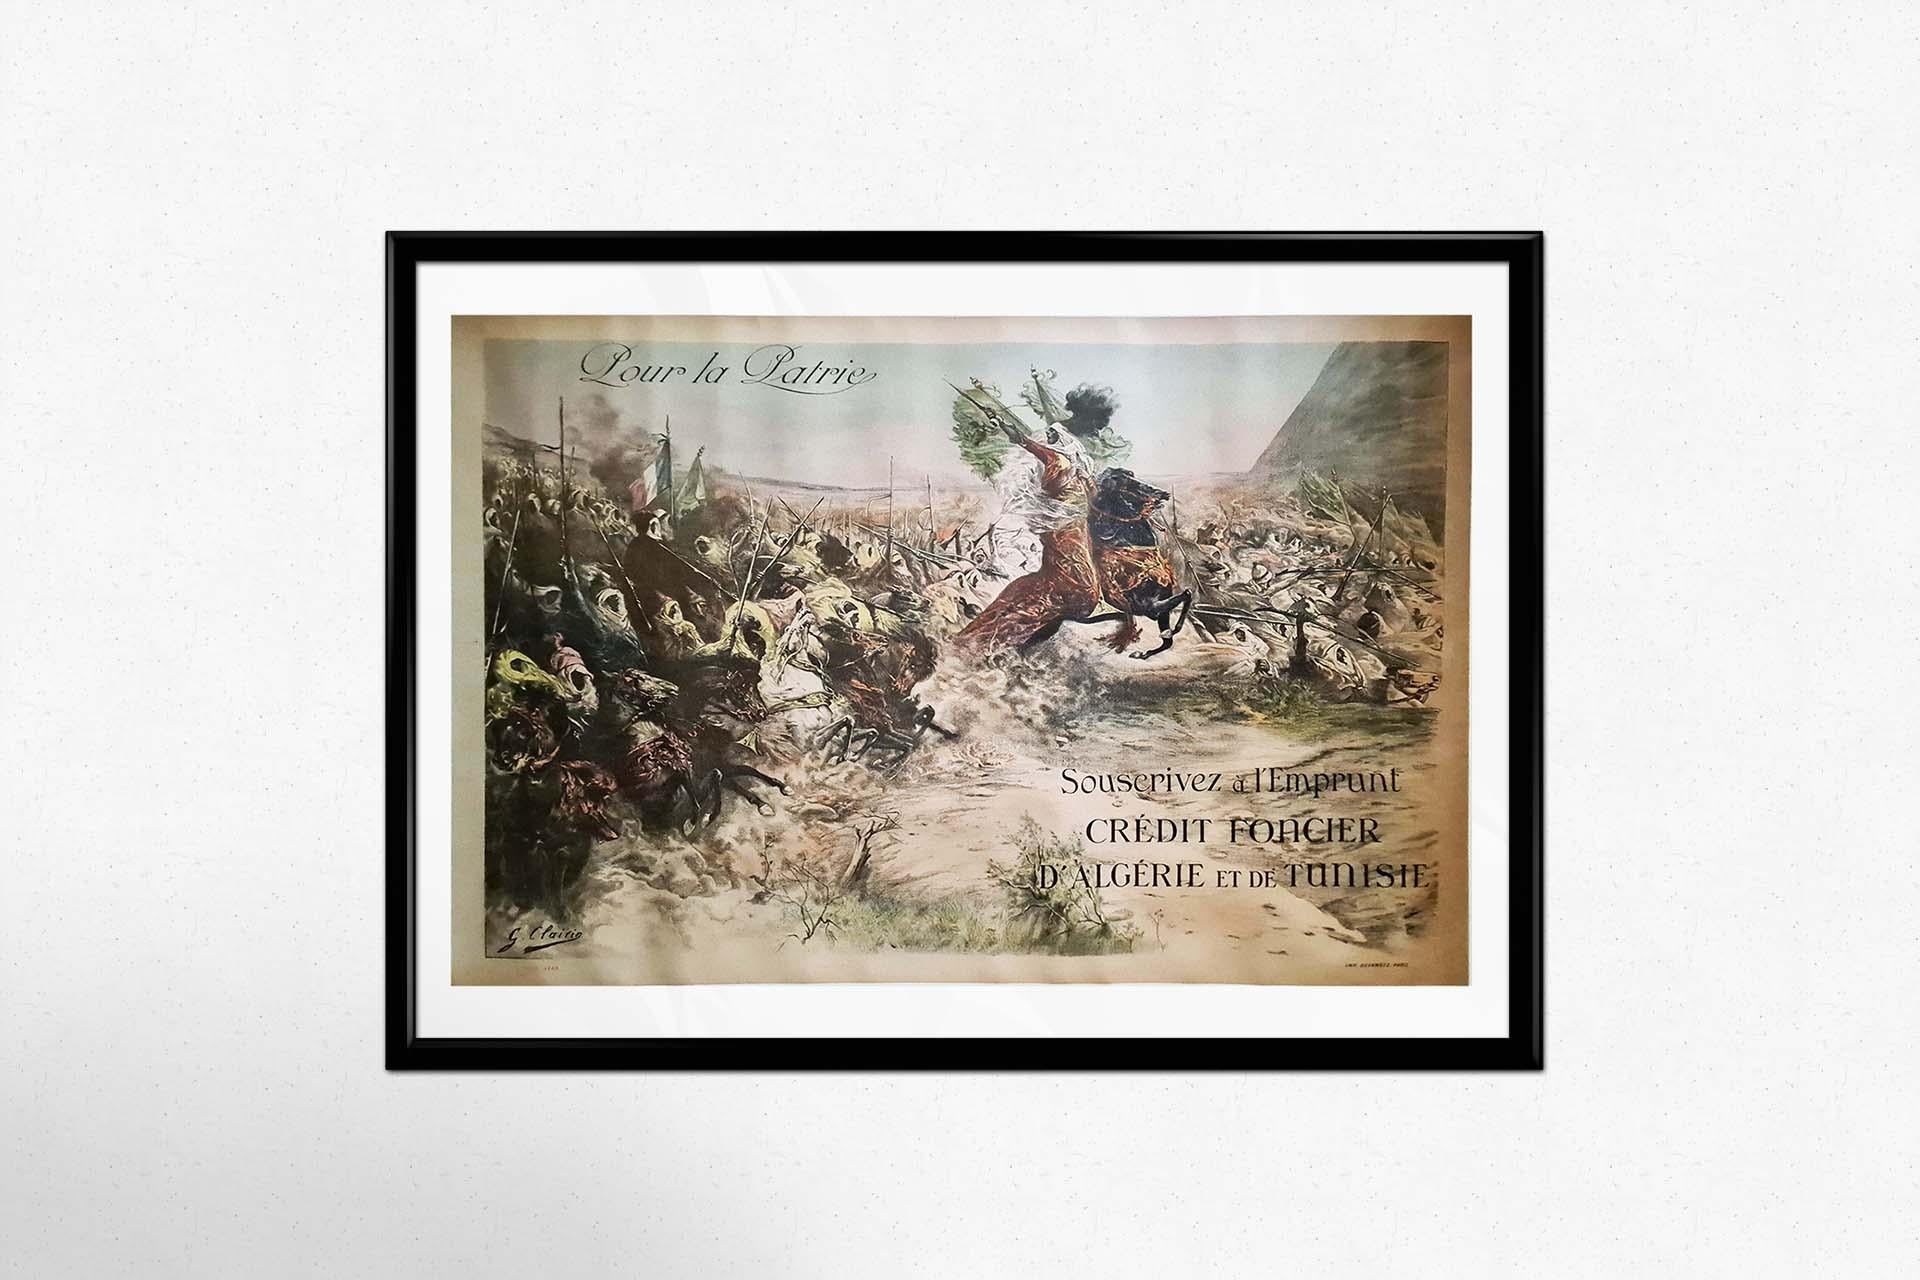 Amid the tumult of World War I, propaganda posters served as essential tools for rallying support and communicating crucial messages to the public. One such poster from this era is the 1918 creation by celebrated French artist Georges Clairin,